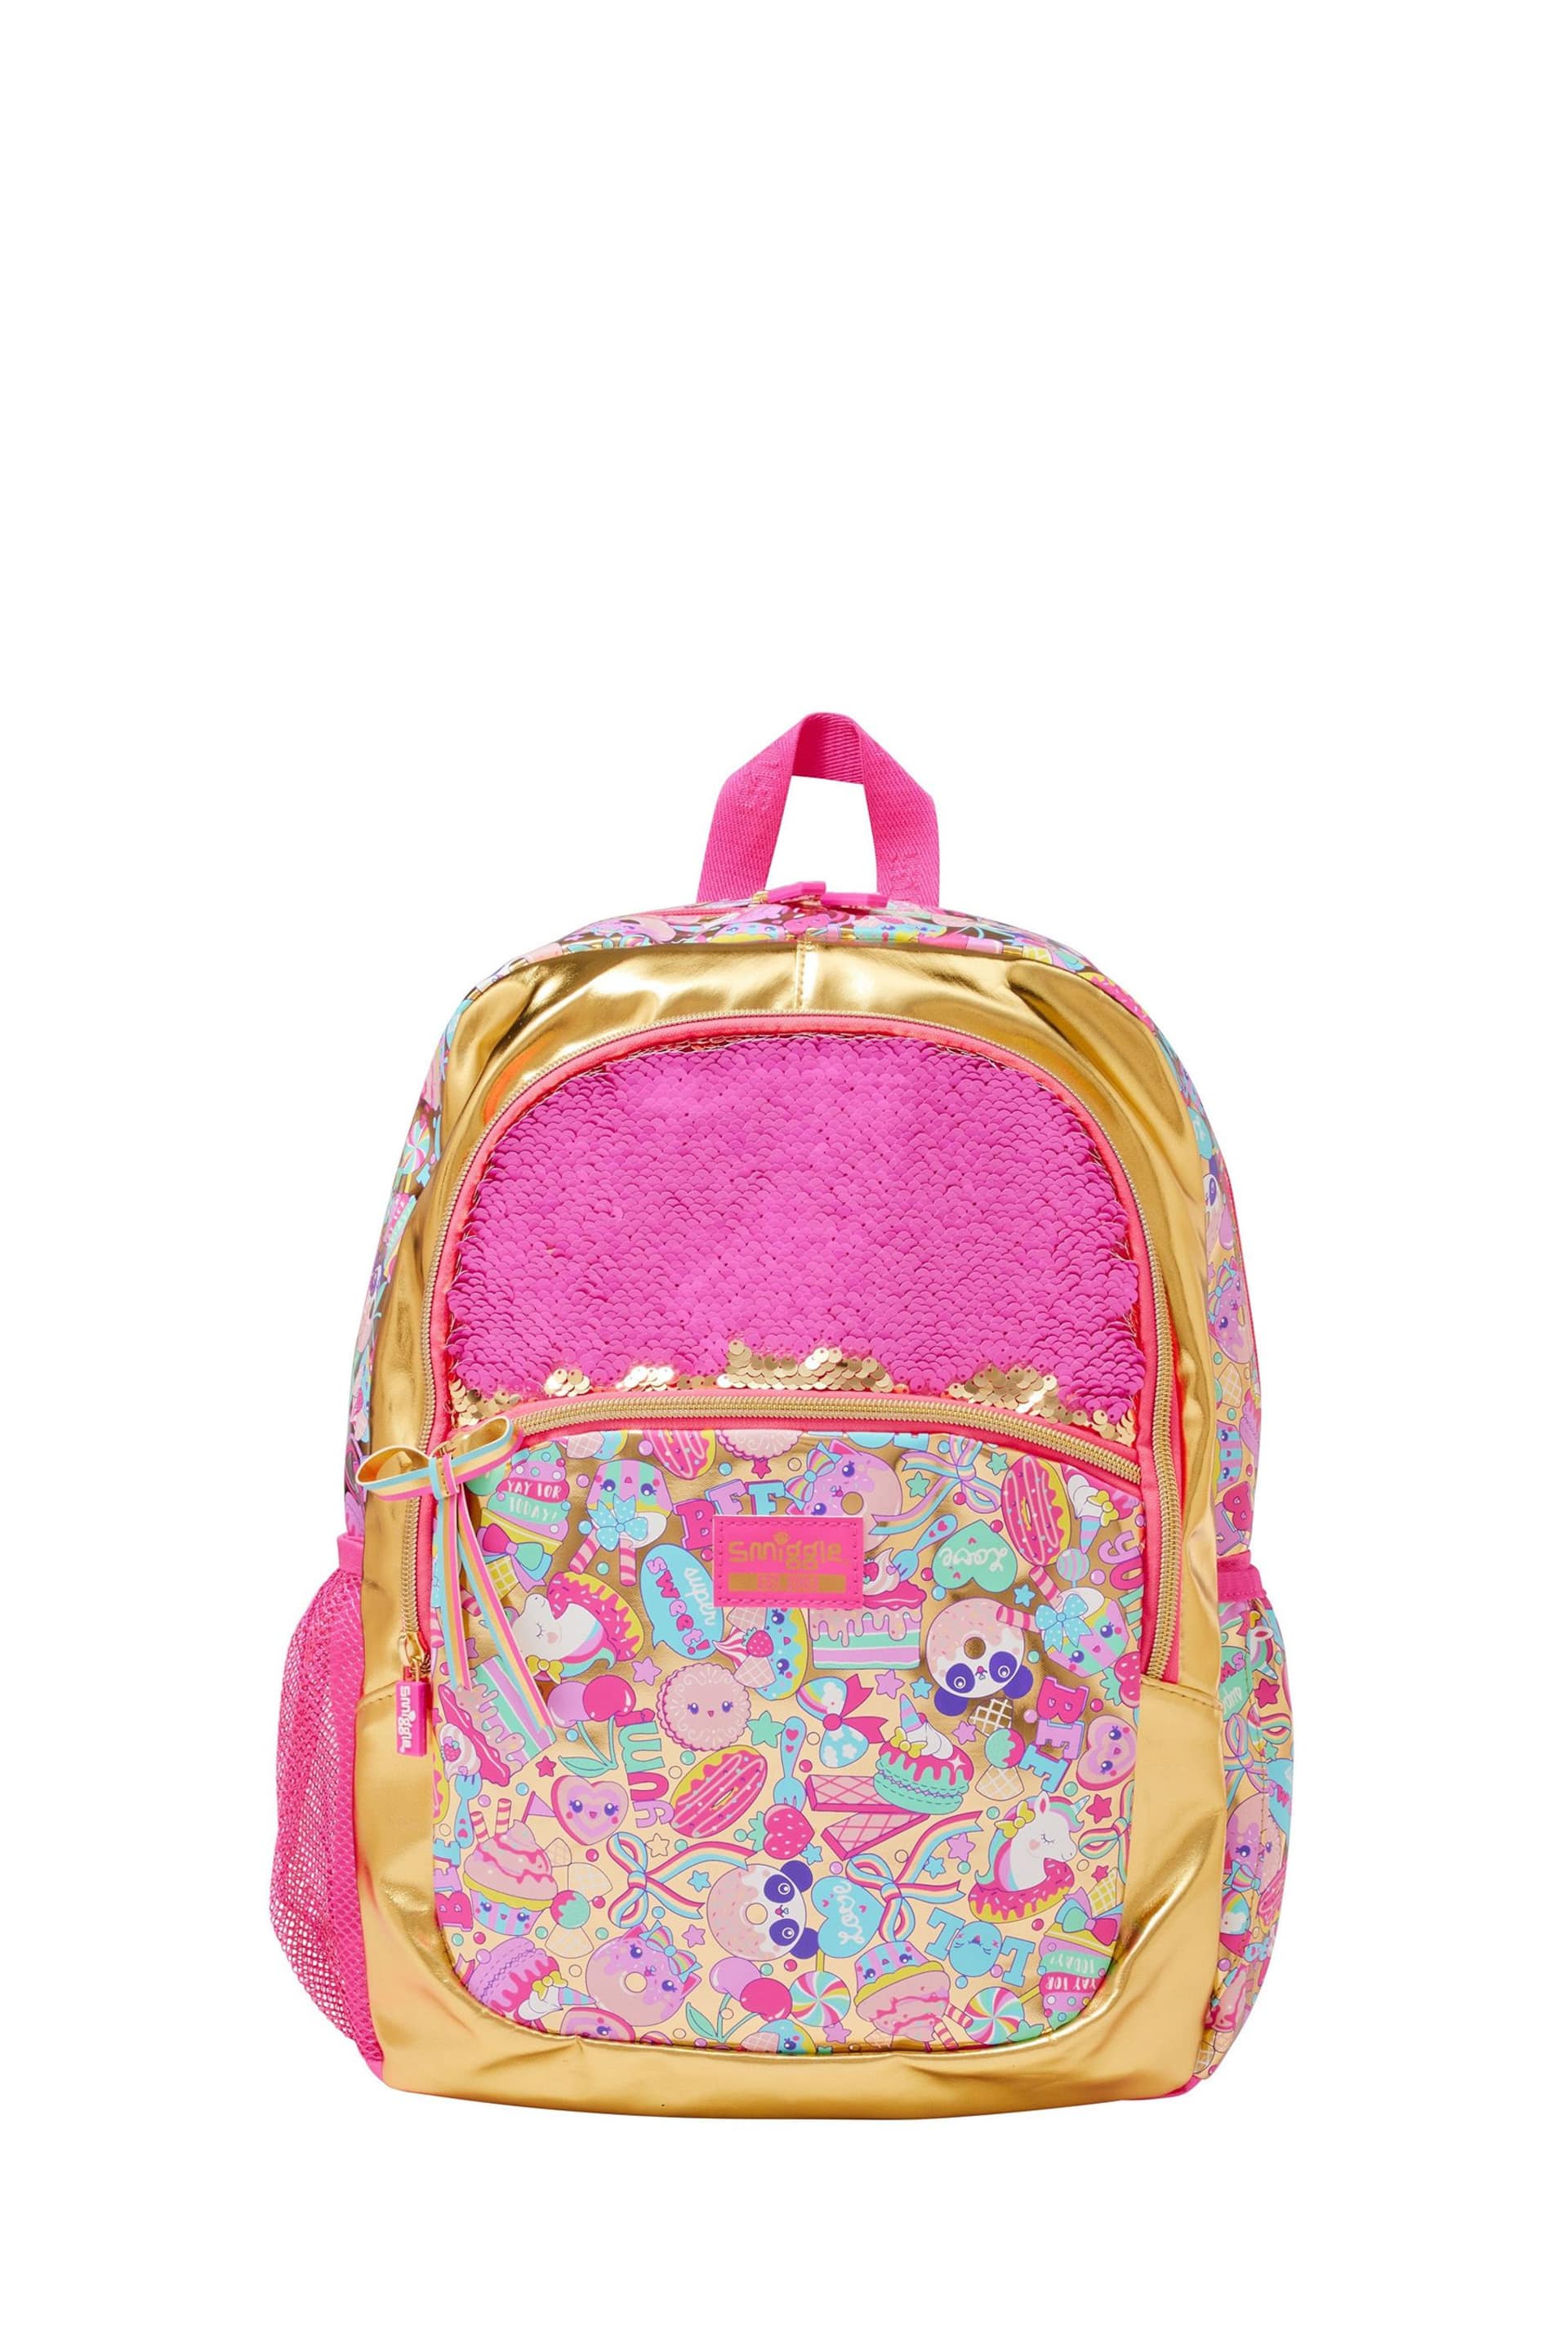 Smiggle Gold 20th Birthday Classic Backpack - Image 4 of 4